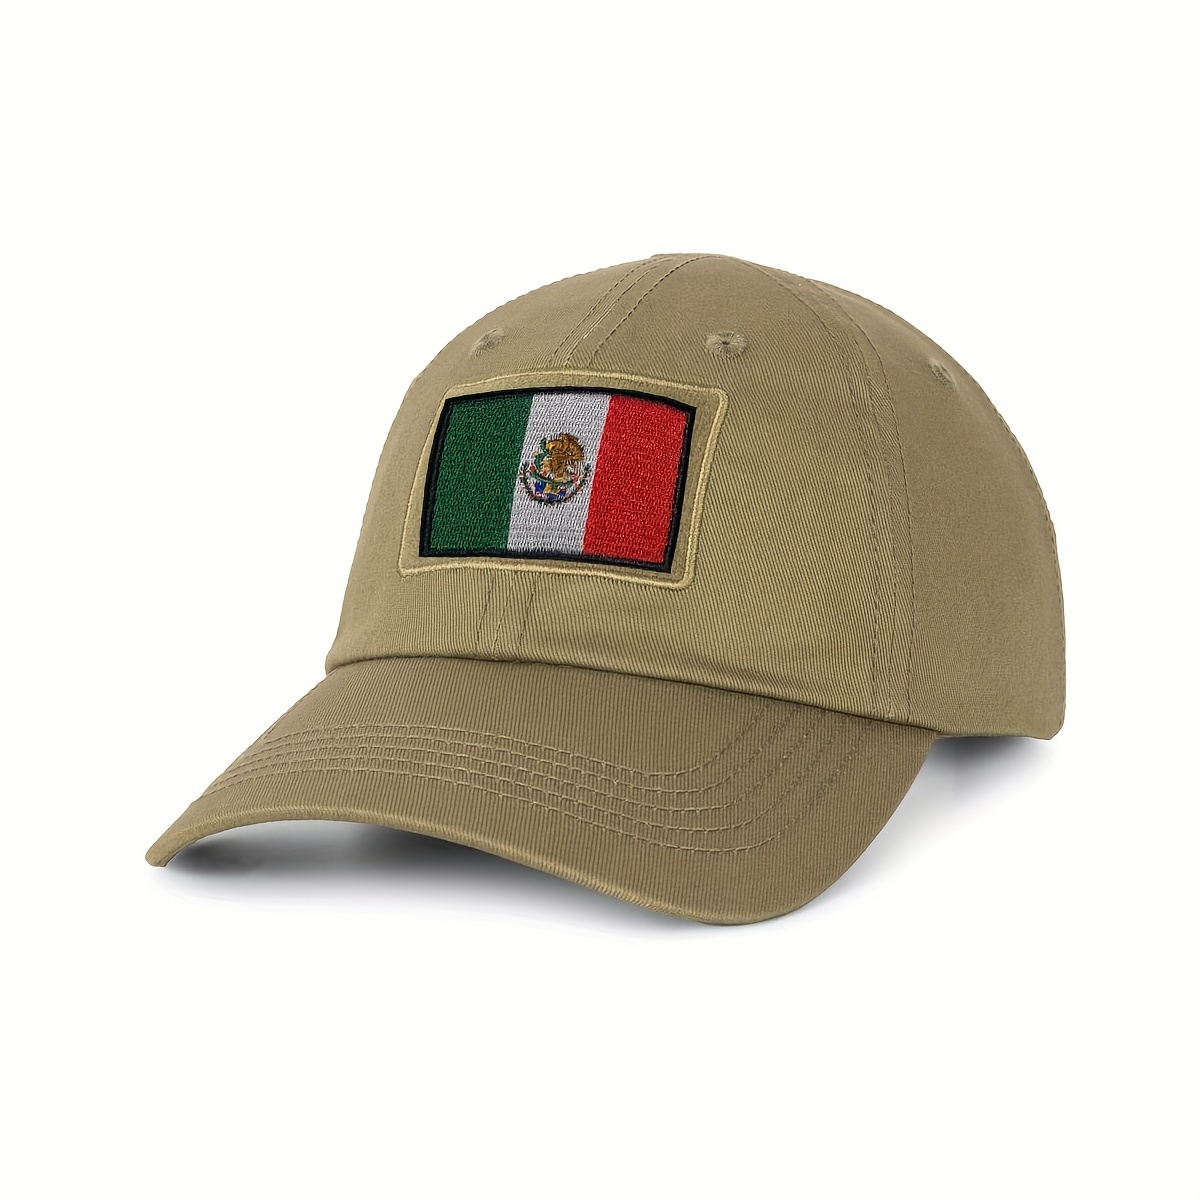 Generic Mexico Flag, Mexico Patch Embroidered Iron On Patch Sew On National  Emblem Small (2.5 inchesx 1.5 inches)